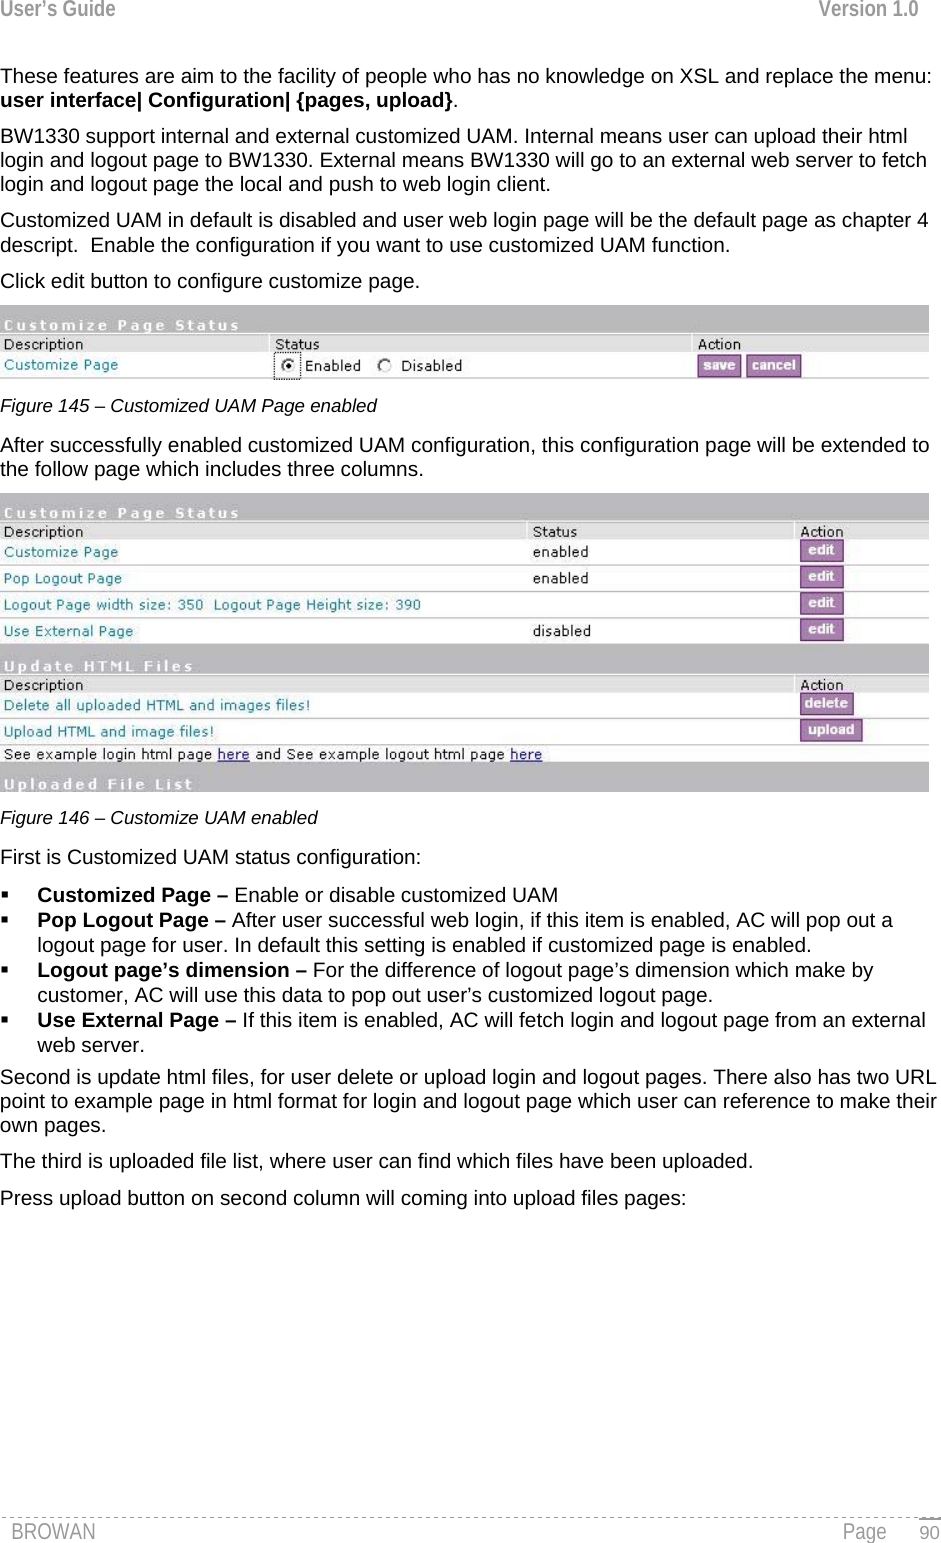 User’s Guide  Version 1.0  These features are aim to the facility of people who has no knowledge on XSL and replace the menu:       user interface| Configuration| {pages, upload}.  BW1330 support internal and external customized UAM. Internal means user can upload their html login and logout page to BW1330. External means BW1330 will go to an external web server to fetch login and logout page the local and push to web login client. Customized UAM in default is disabled and user web login page will be the default page as chapter 4 descript.  Enable the configuration if you want to use customized UAM function. Click edit button to configure customize page.  Figure 145 – Customized UAM Page enabled After successfully enabled customized UAM configuration, this configuration page will be extended to the follow page which includes three columns.  Figure 146 – Customize UAM enabled First is Customized UAM status configuration:  Customized Page – Enable or disable customized UAM  Pop Logout Page – After user successful web login, if this item is enabled, AC will pop out a     logout page for user. In default this setting is enabled if customized page is enabled.  Logout page’s dimension – For the difference of logout page’s dimension which make by customer, AC will use this data to pop out user’s customized logout page.  Use External Page – If this item is enabled, AC will fetch login and logout page from an external web server. Second is update html files, for user delete or upload login and logout pages. There also has two URL point to example page in html format for login and logout page which user can reference to make their own pages. The third is uploaded file list, where user can find which files have been uploaded. Press upload button on second column will coming into upload files pages: BROWAN                                                                                                                                               Page   90